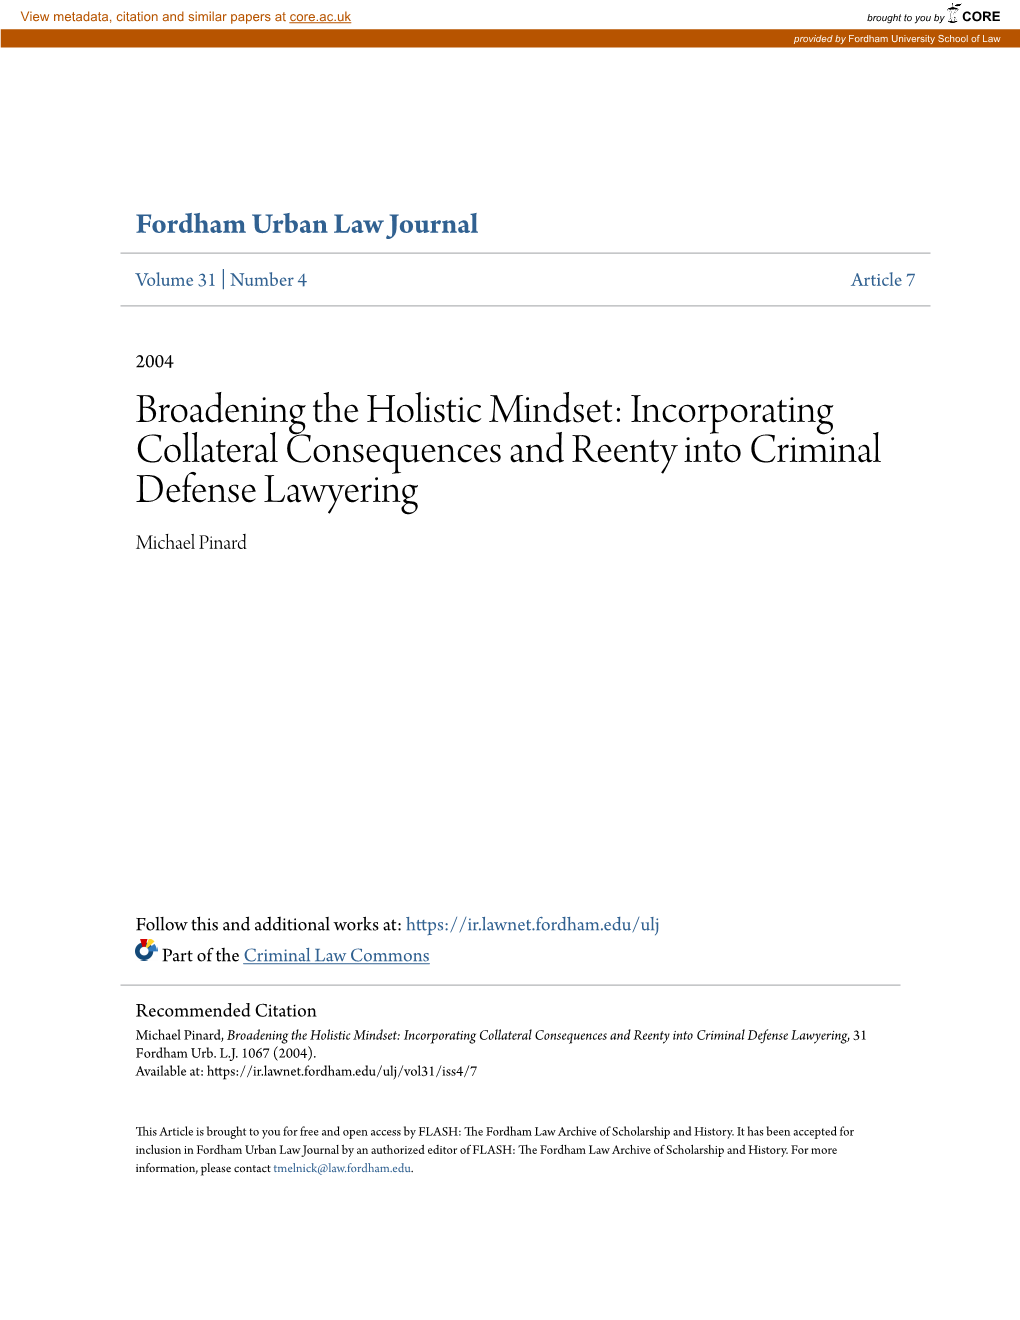 Broadening the Holistic Mindset: Incorporating Collateral Consequences and Reenty Into Criminal Defense Lawyering Michael Pinard